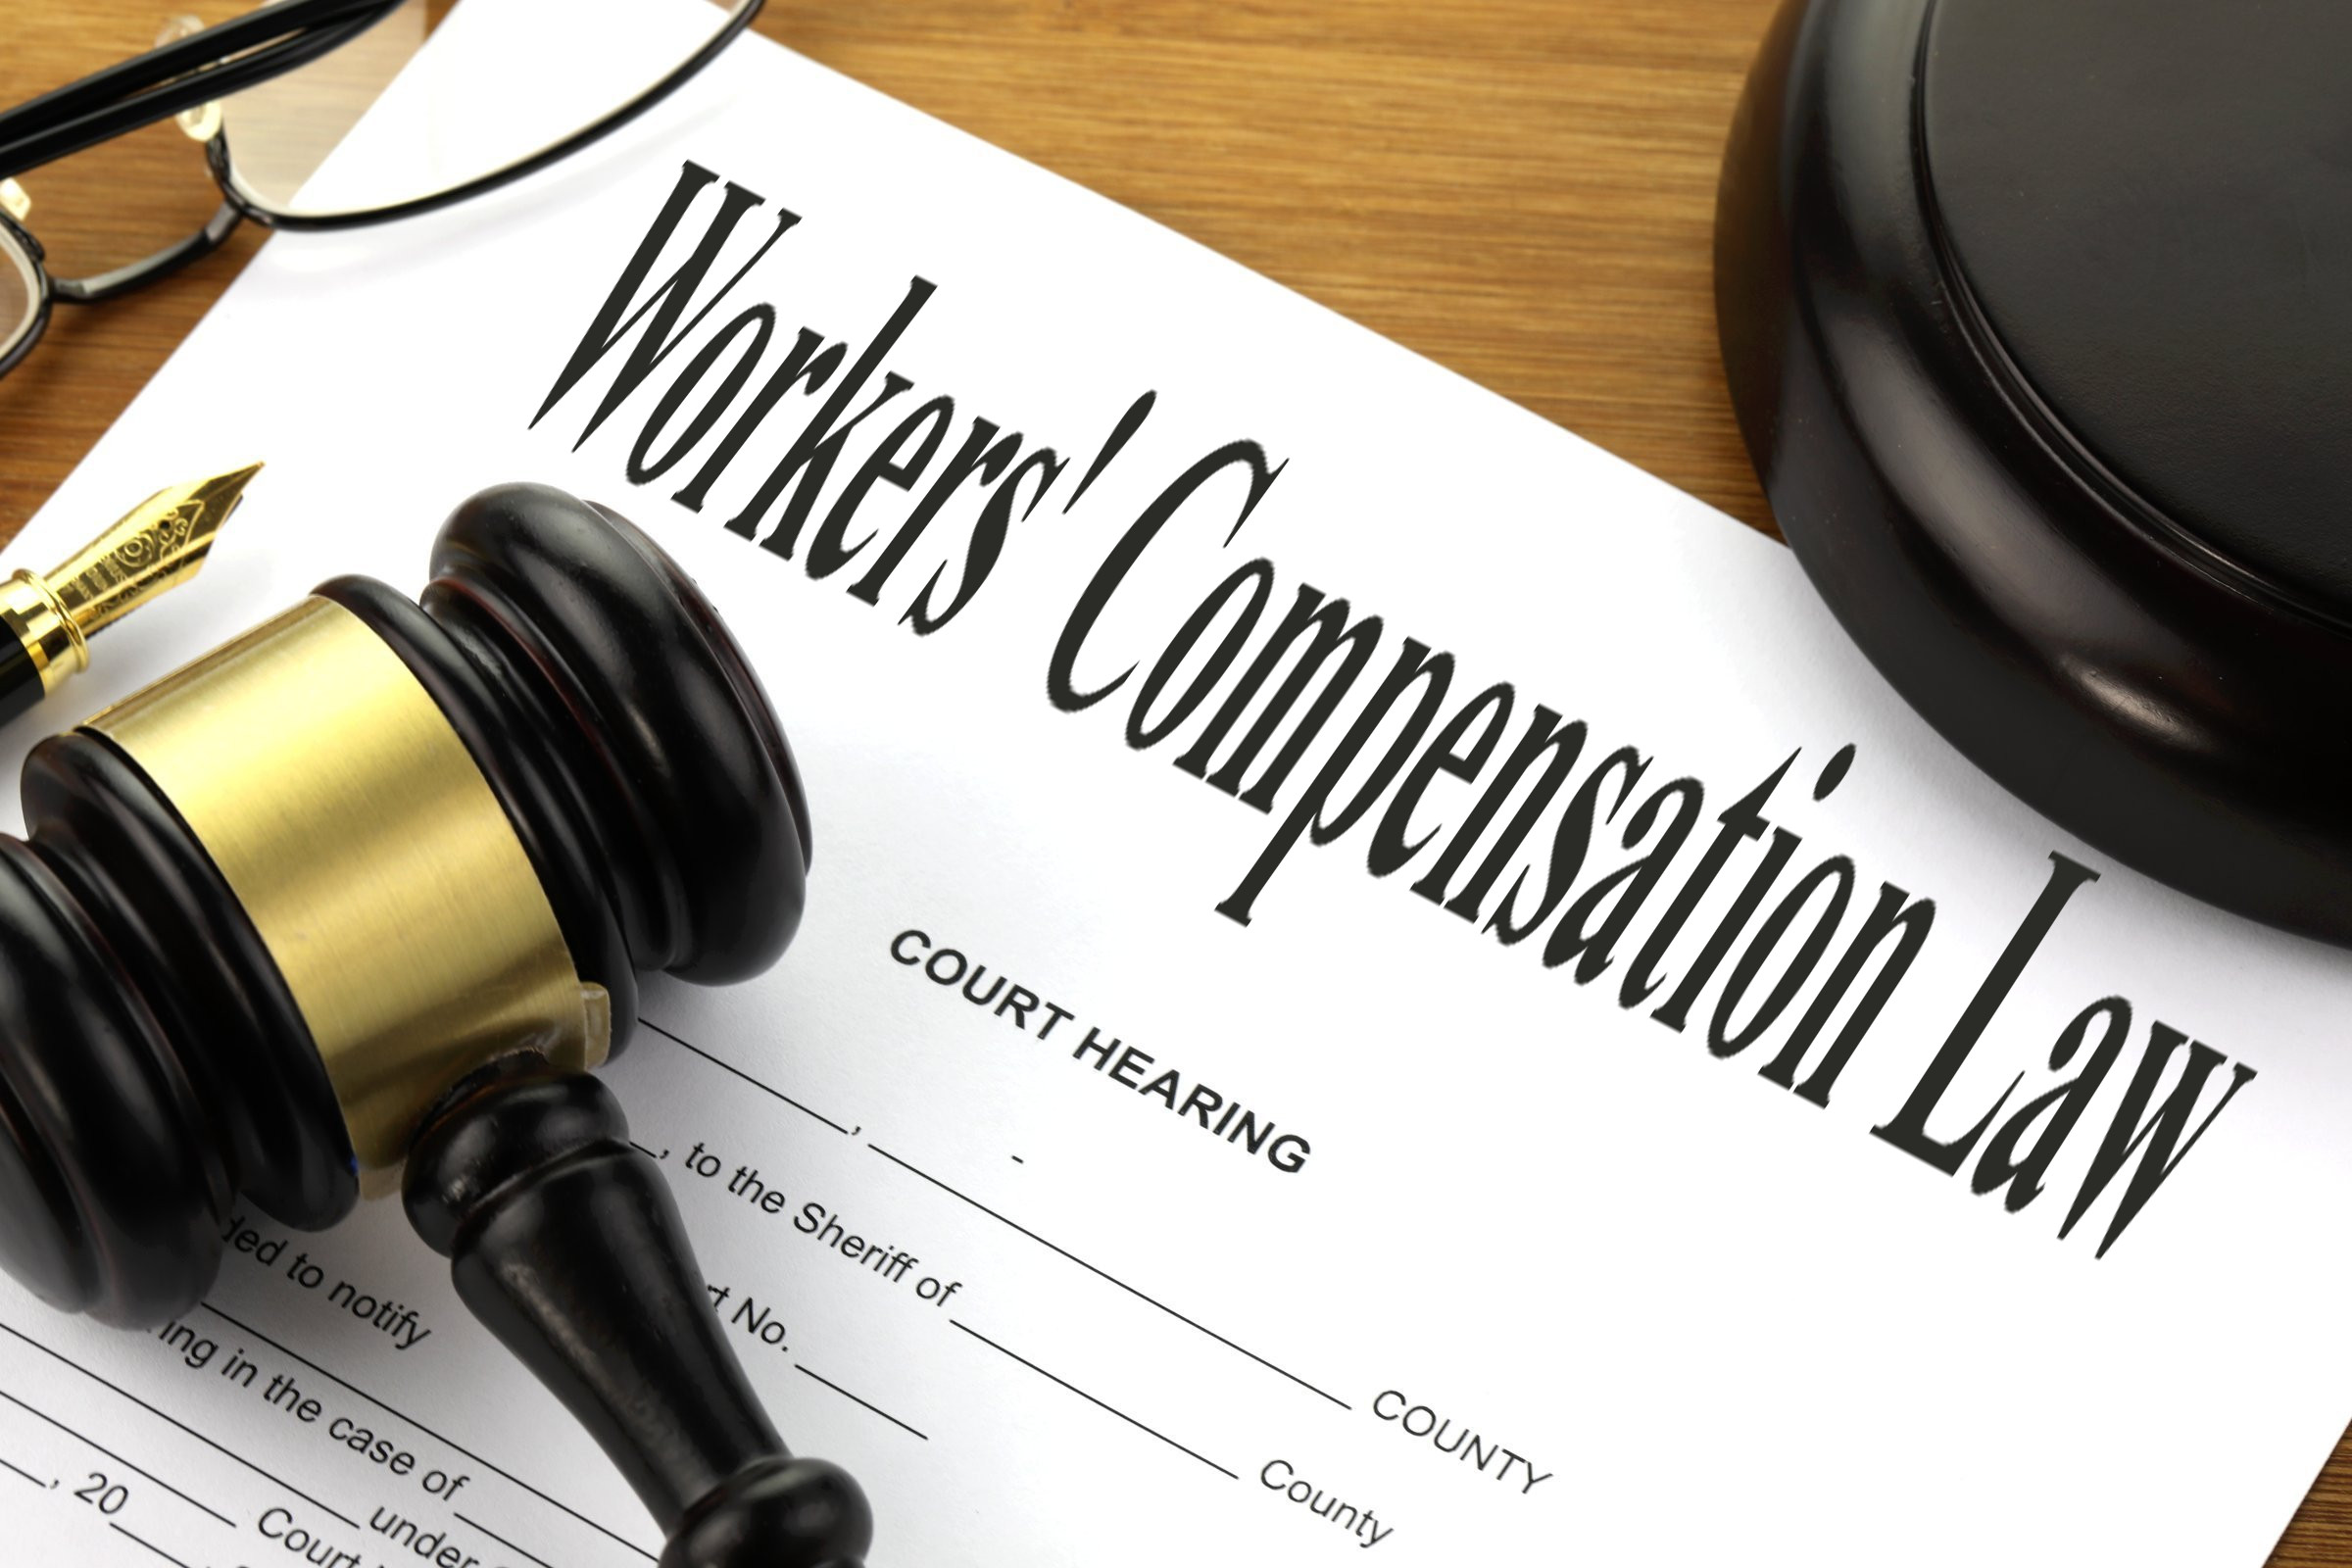 Workers Compensation Law